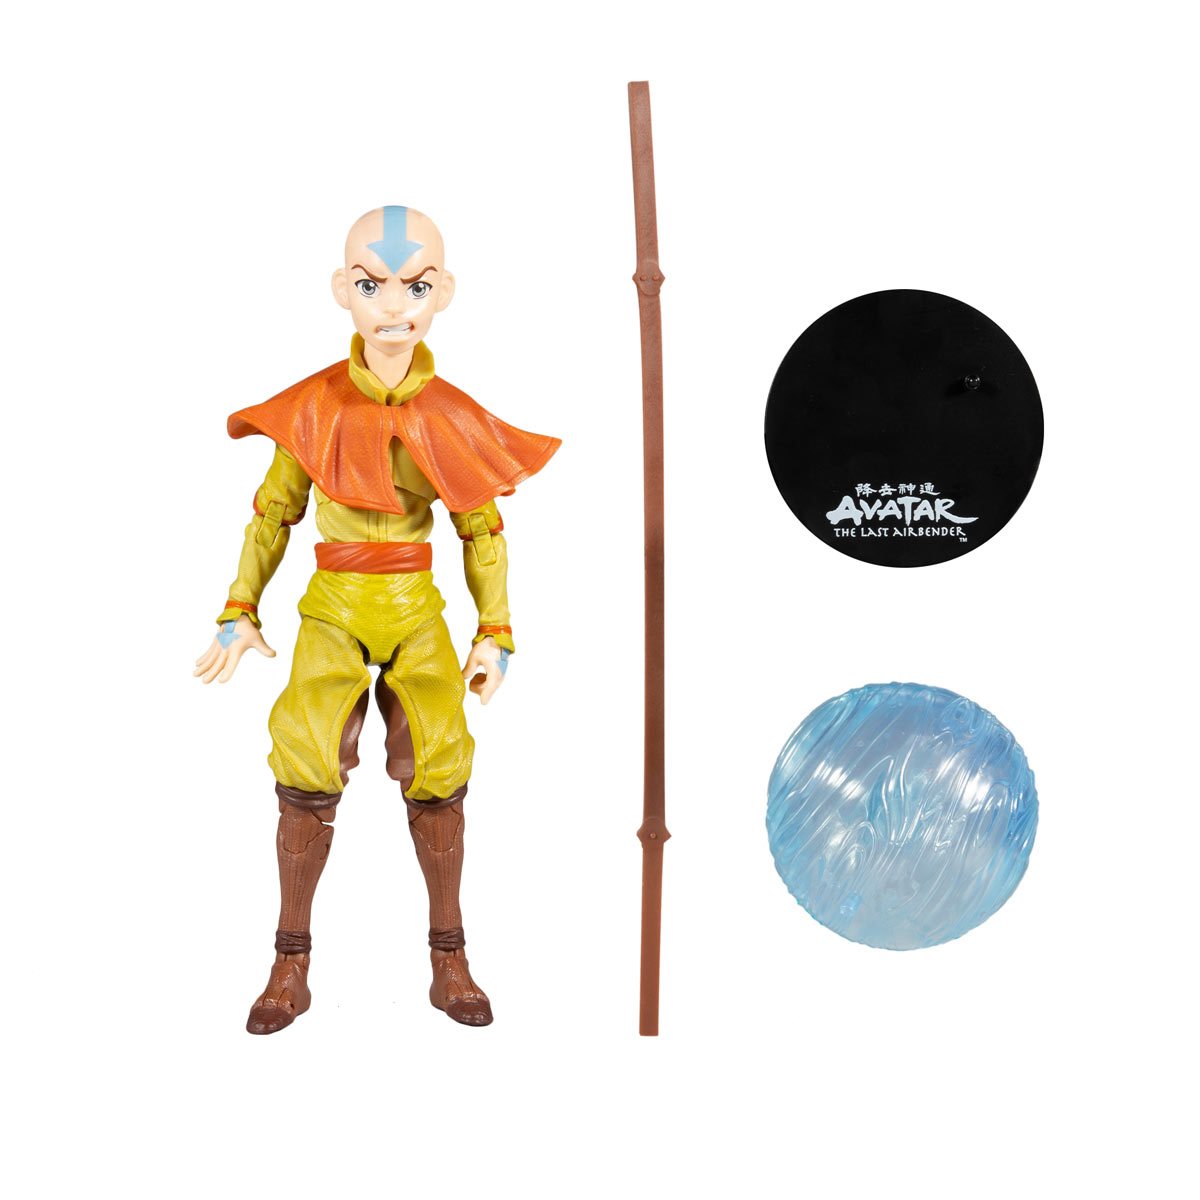 Avatar: The Last Airbender - Aang 7-Inch Action Figure